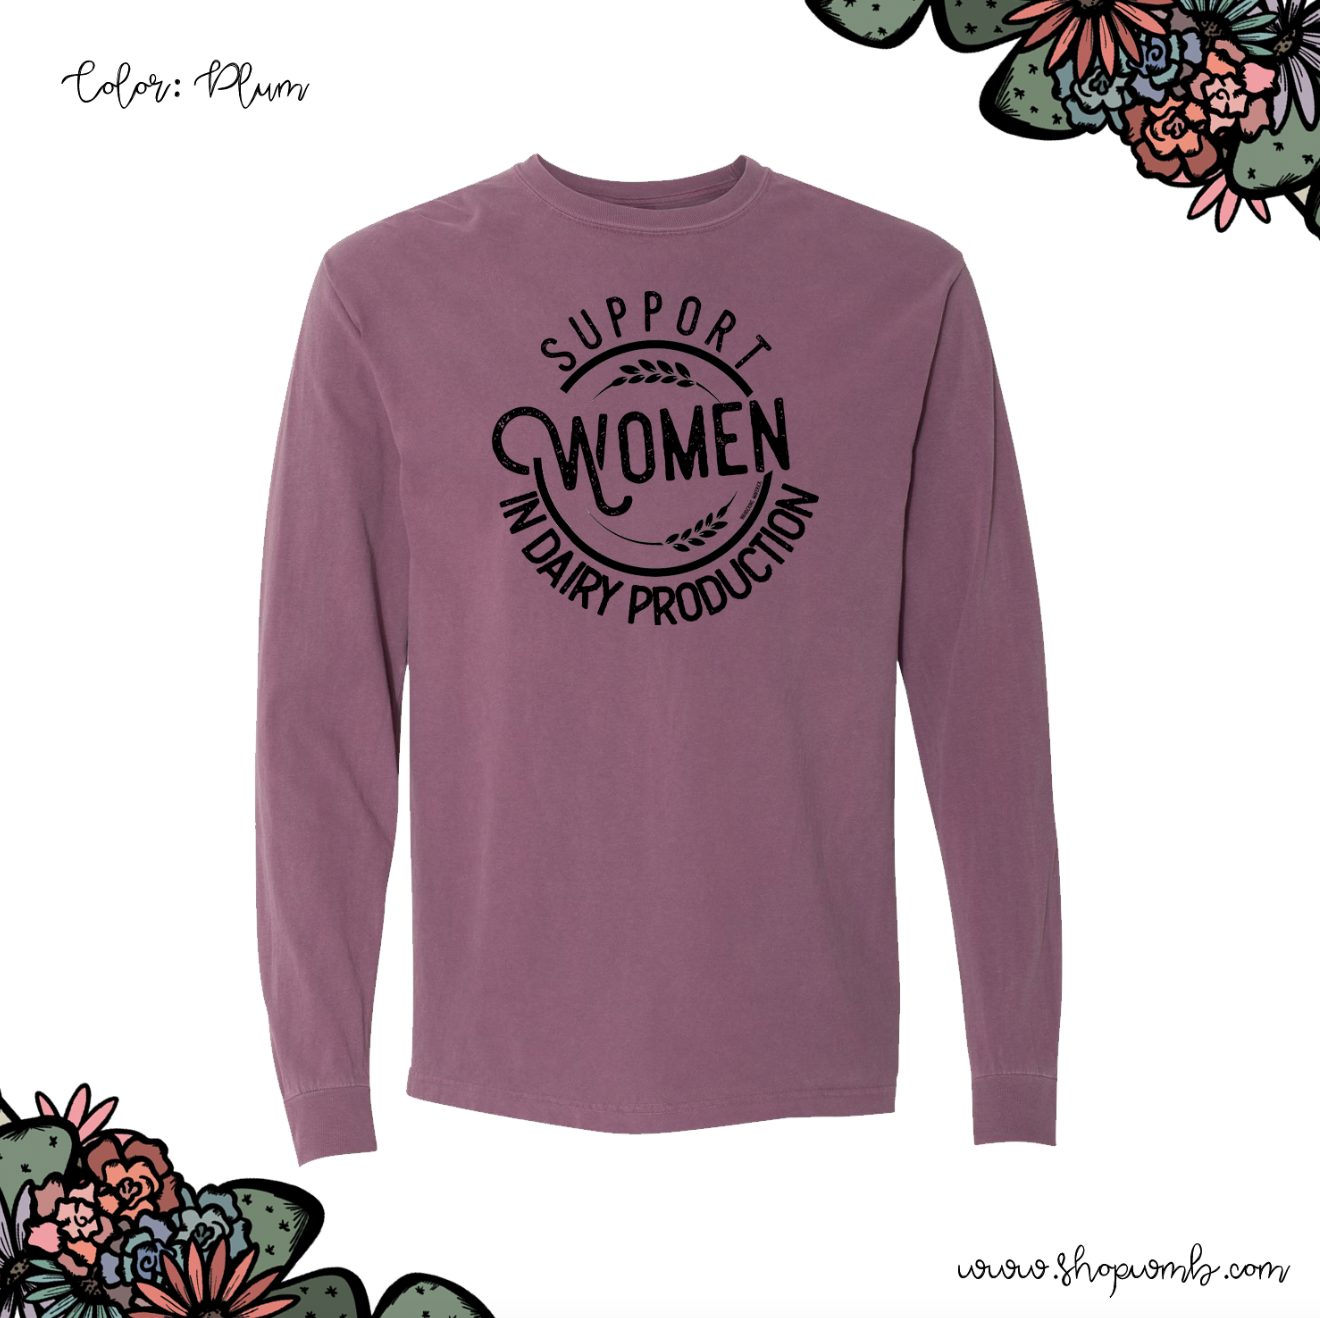 Support Women In Dairy Production LONG SLEEVE T-Shirt (S-3XL) - Multiple Colors!